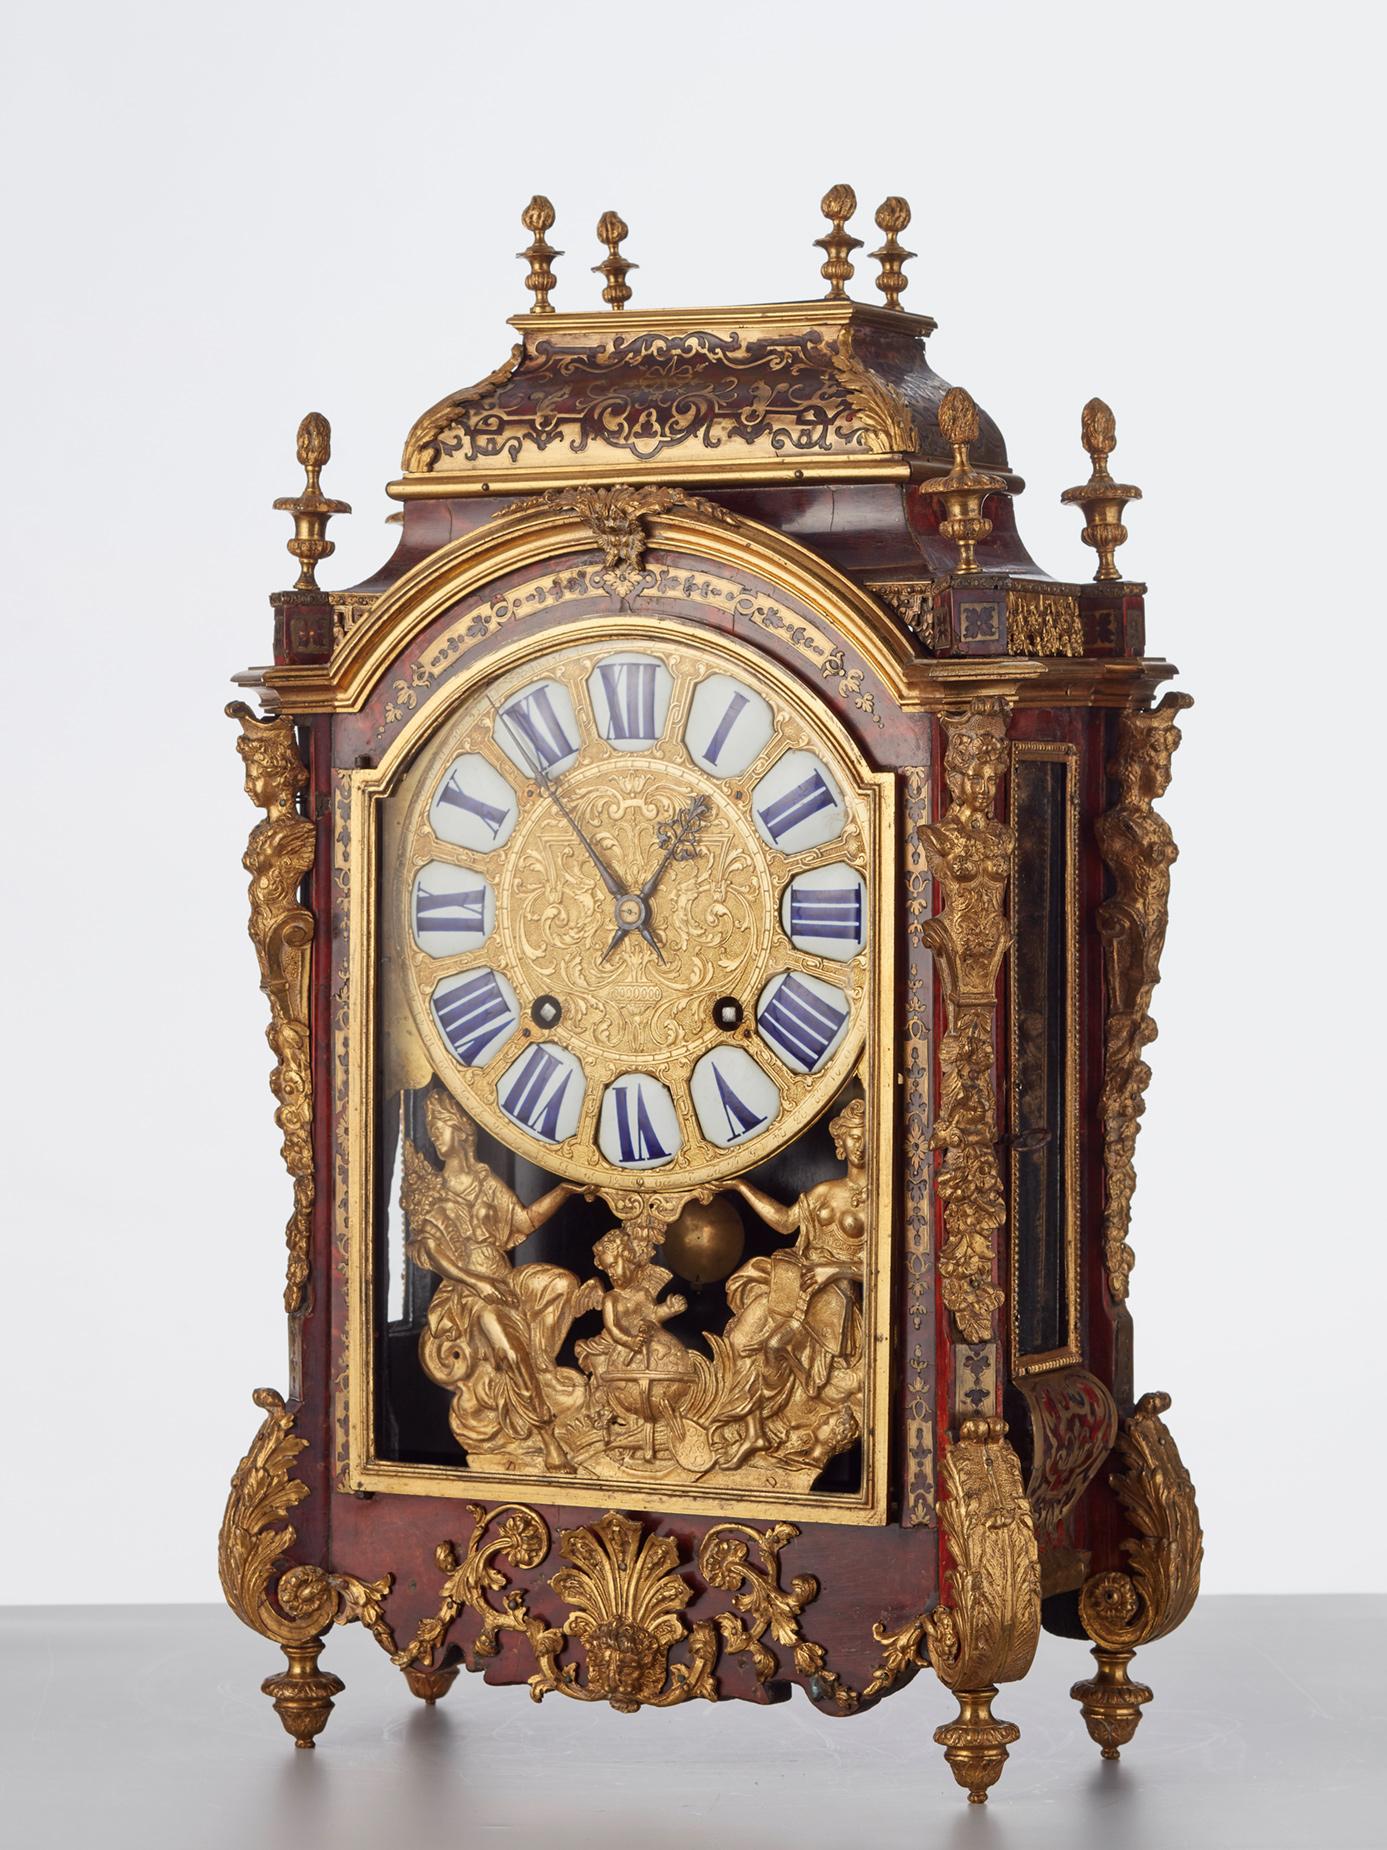 A good and impressive late Louis XIV boulle inlaid Religieuse mantel clock with richly ormolu mounted bronzes signed C Bonneual a Paris.

The strong Classic Louis XIV Influenced good looking strong case - this design of the case was very popular in